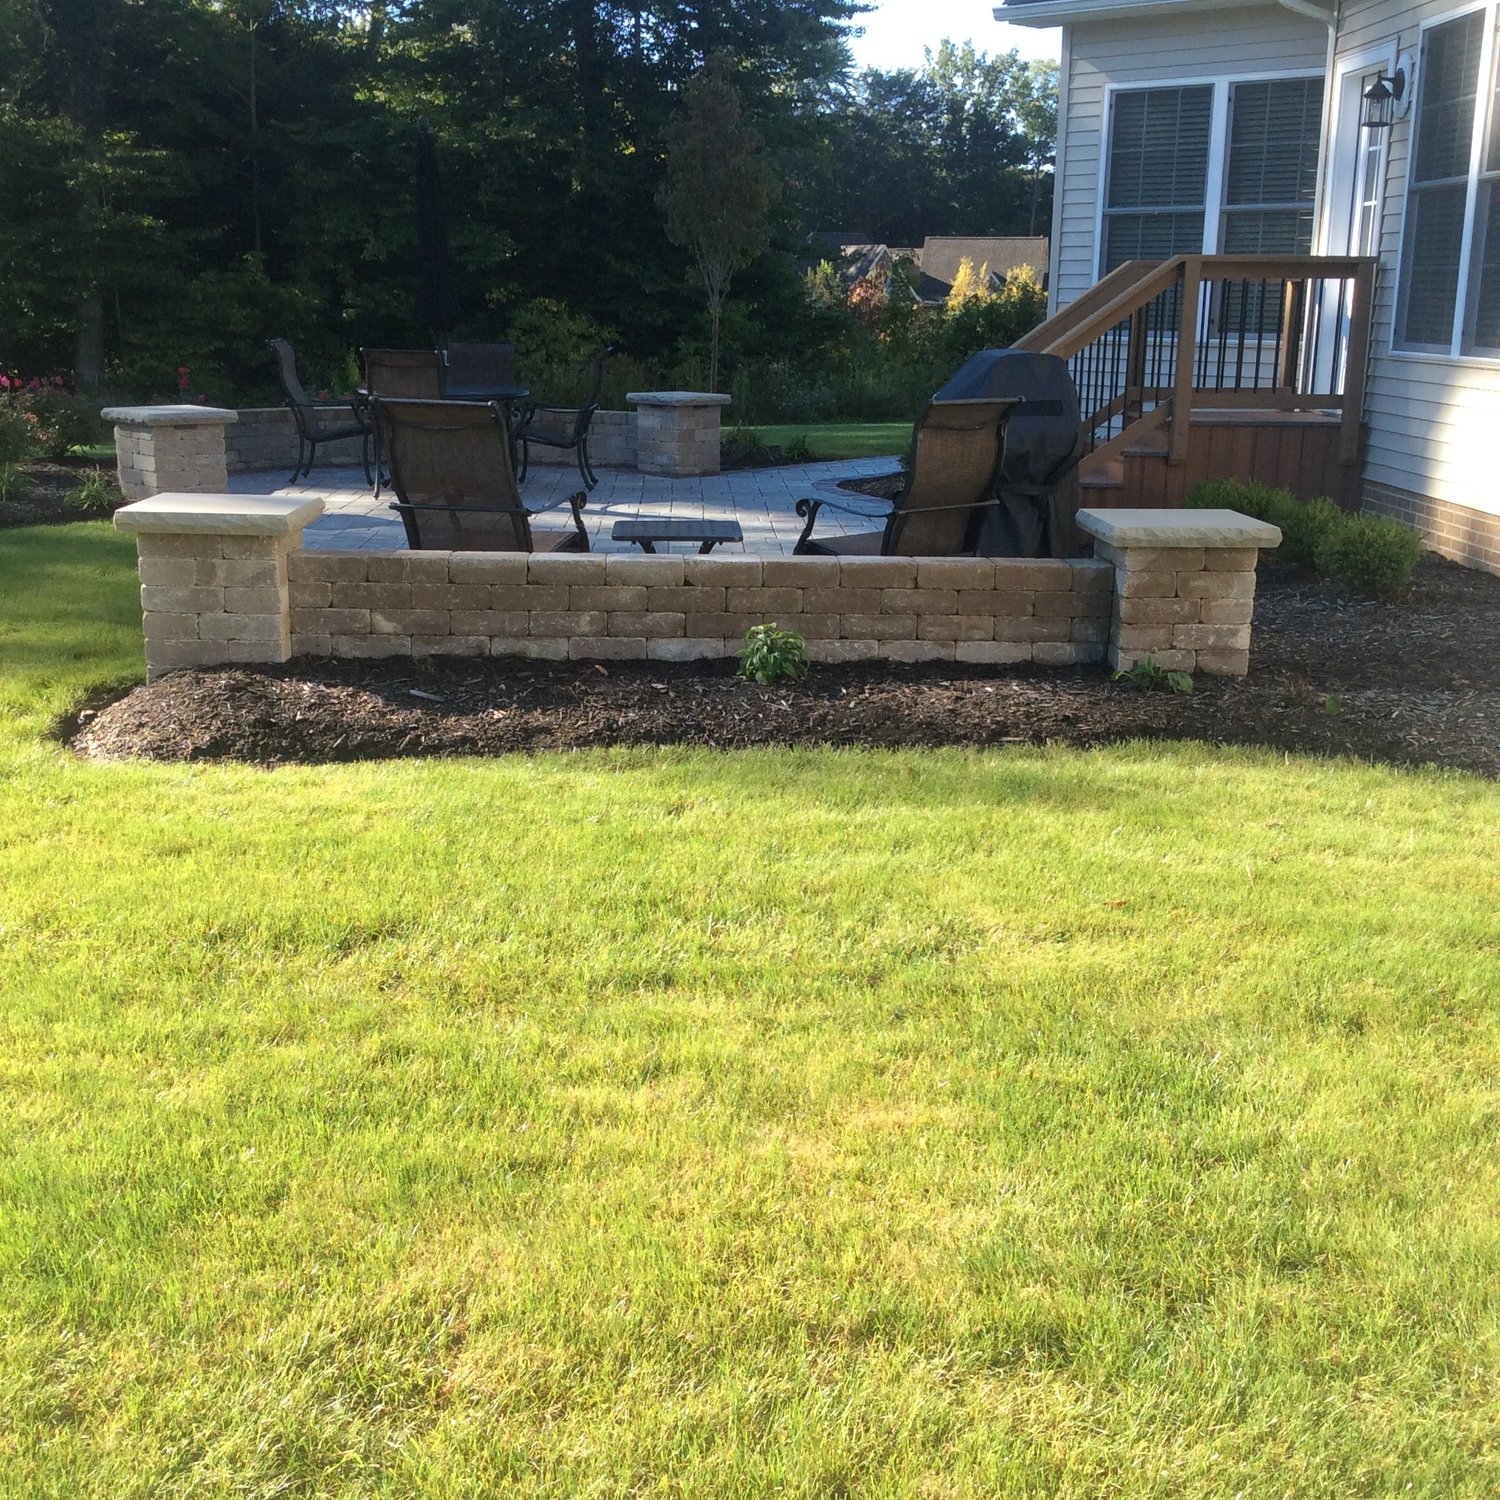 Landscaping Companies And Landscapers, Landscaping Around Me